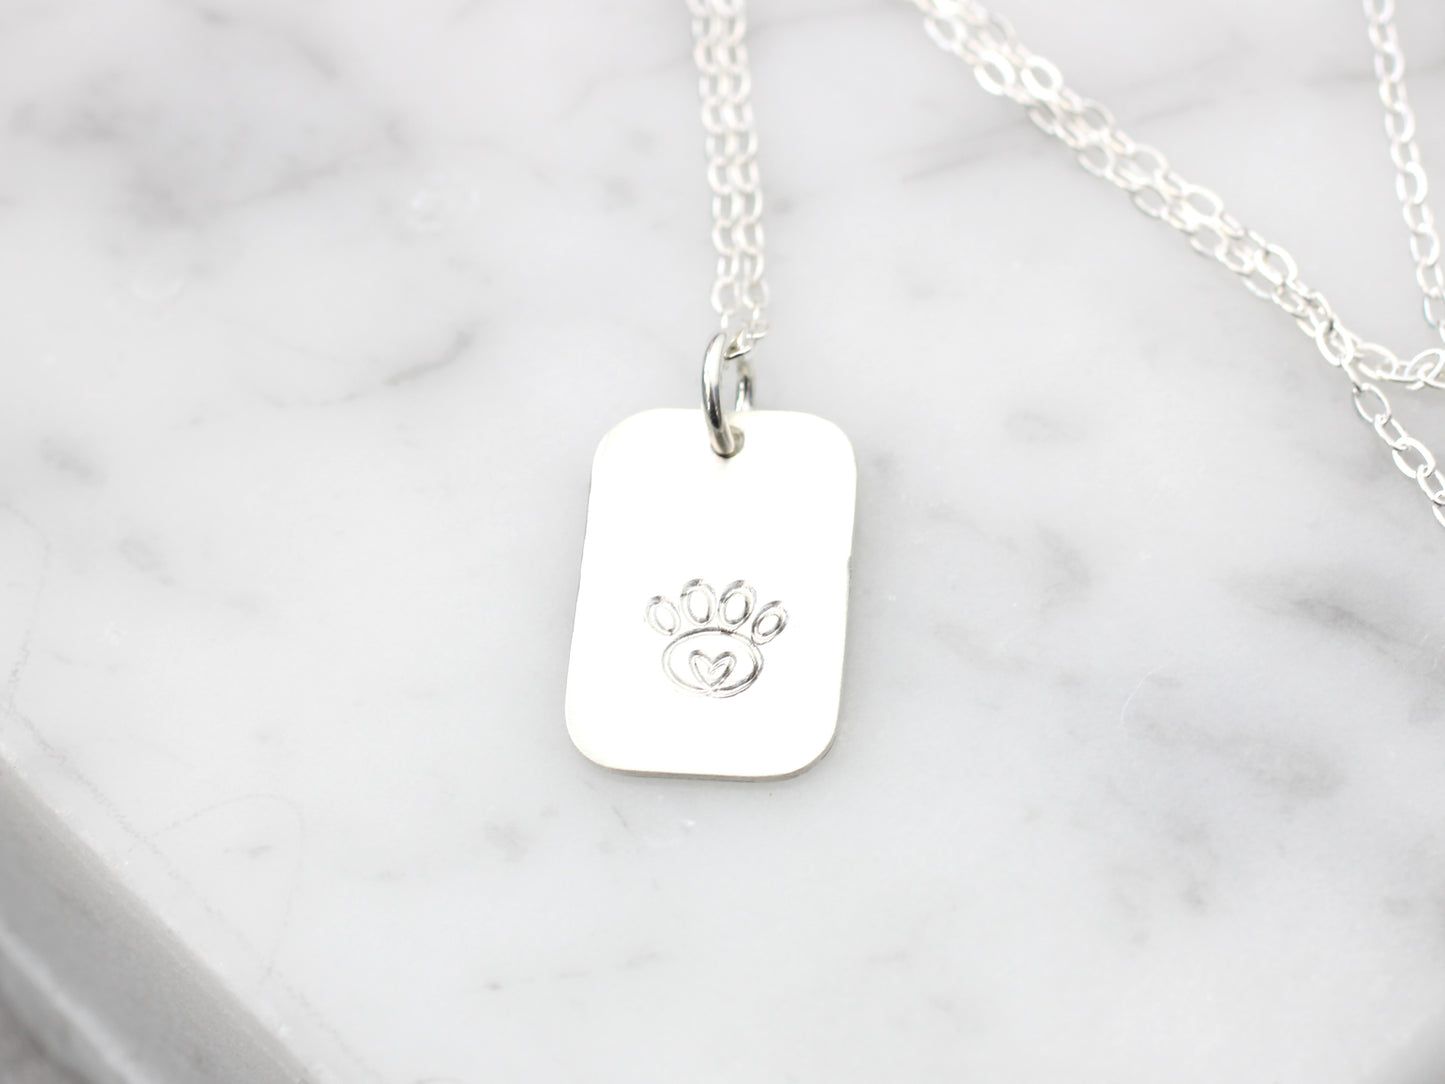 Paw necklace in sterling silver.